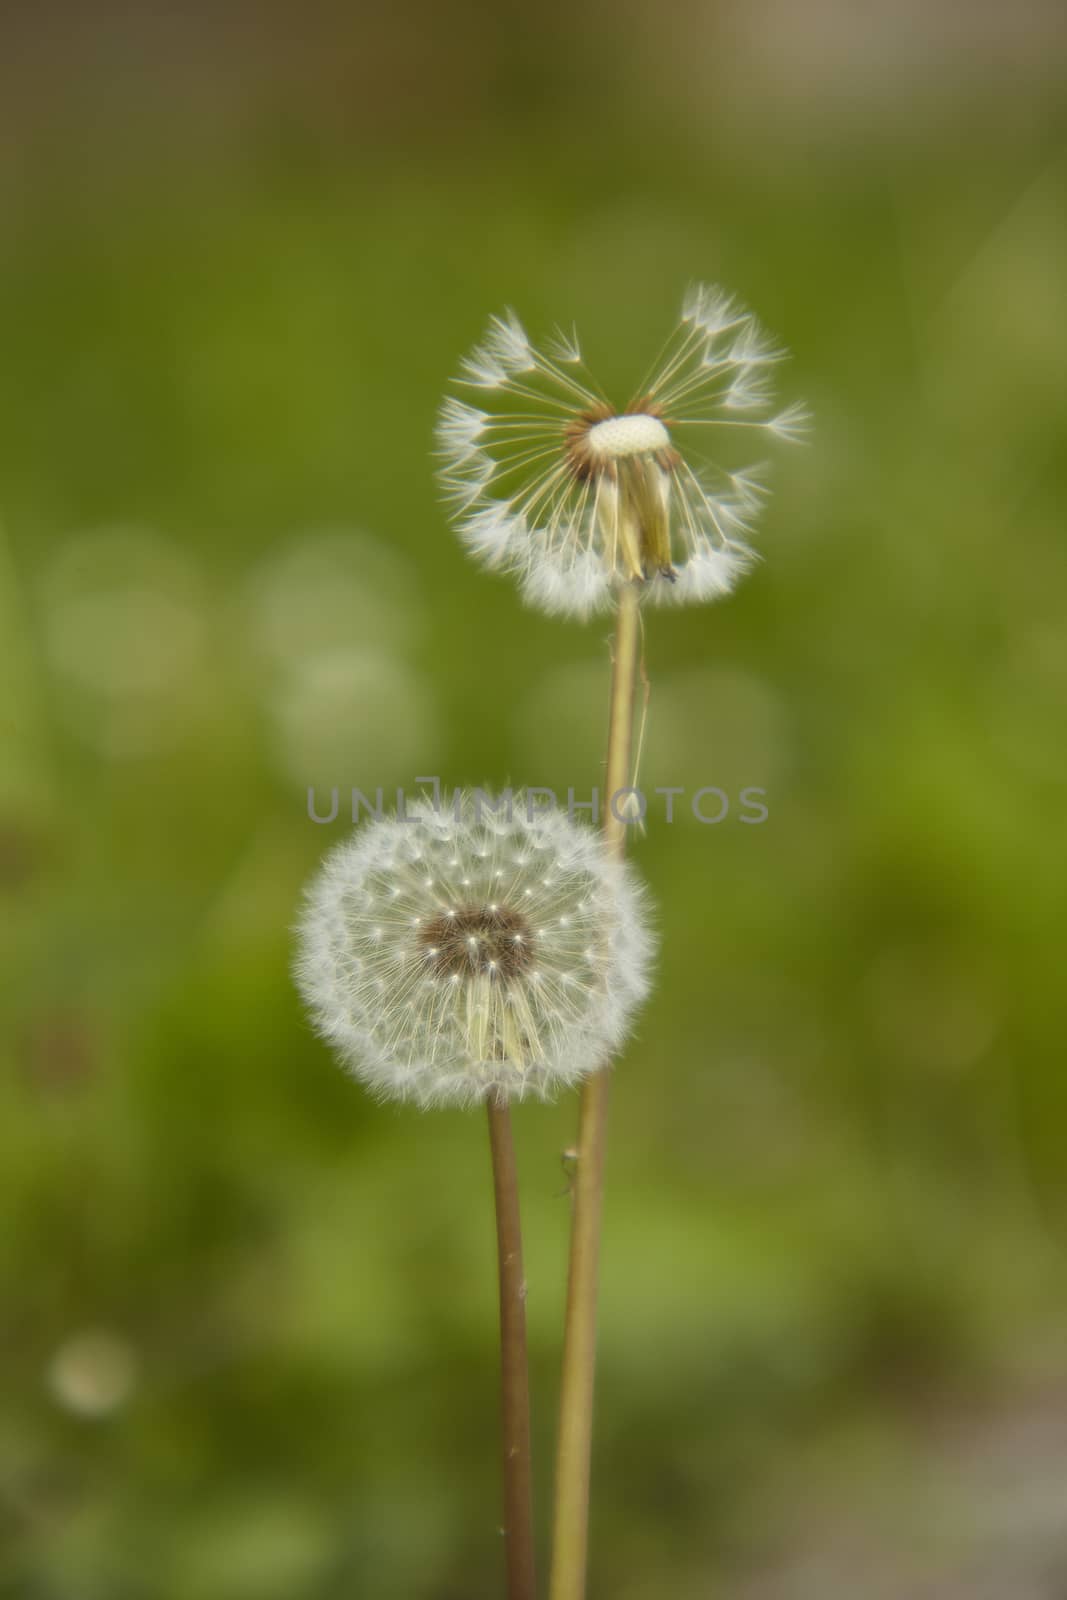 Dandelion pair in the period of infructiscence with macro shot that gives a green background with the subject well detached.